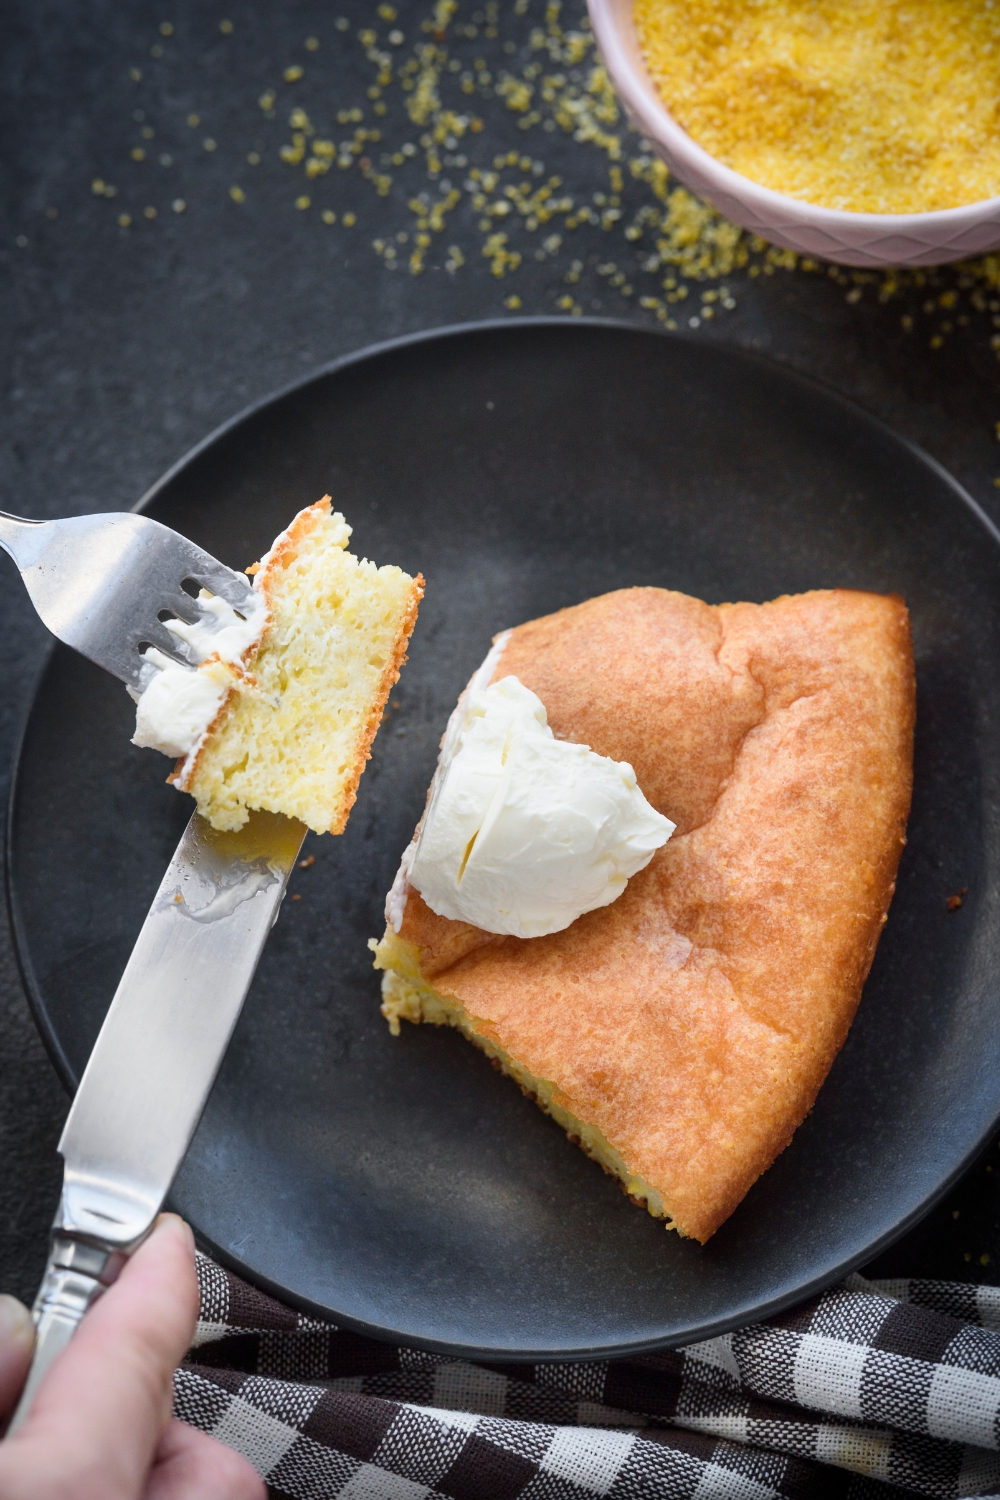 Someone cuts a bite of cornbread out of a slice on a black plate. The cornbread is topped with cream cheese.